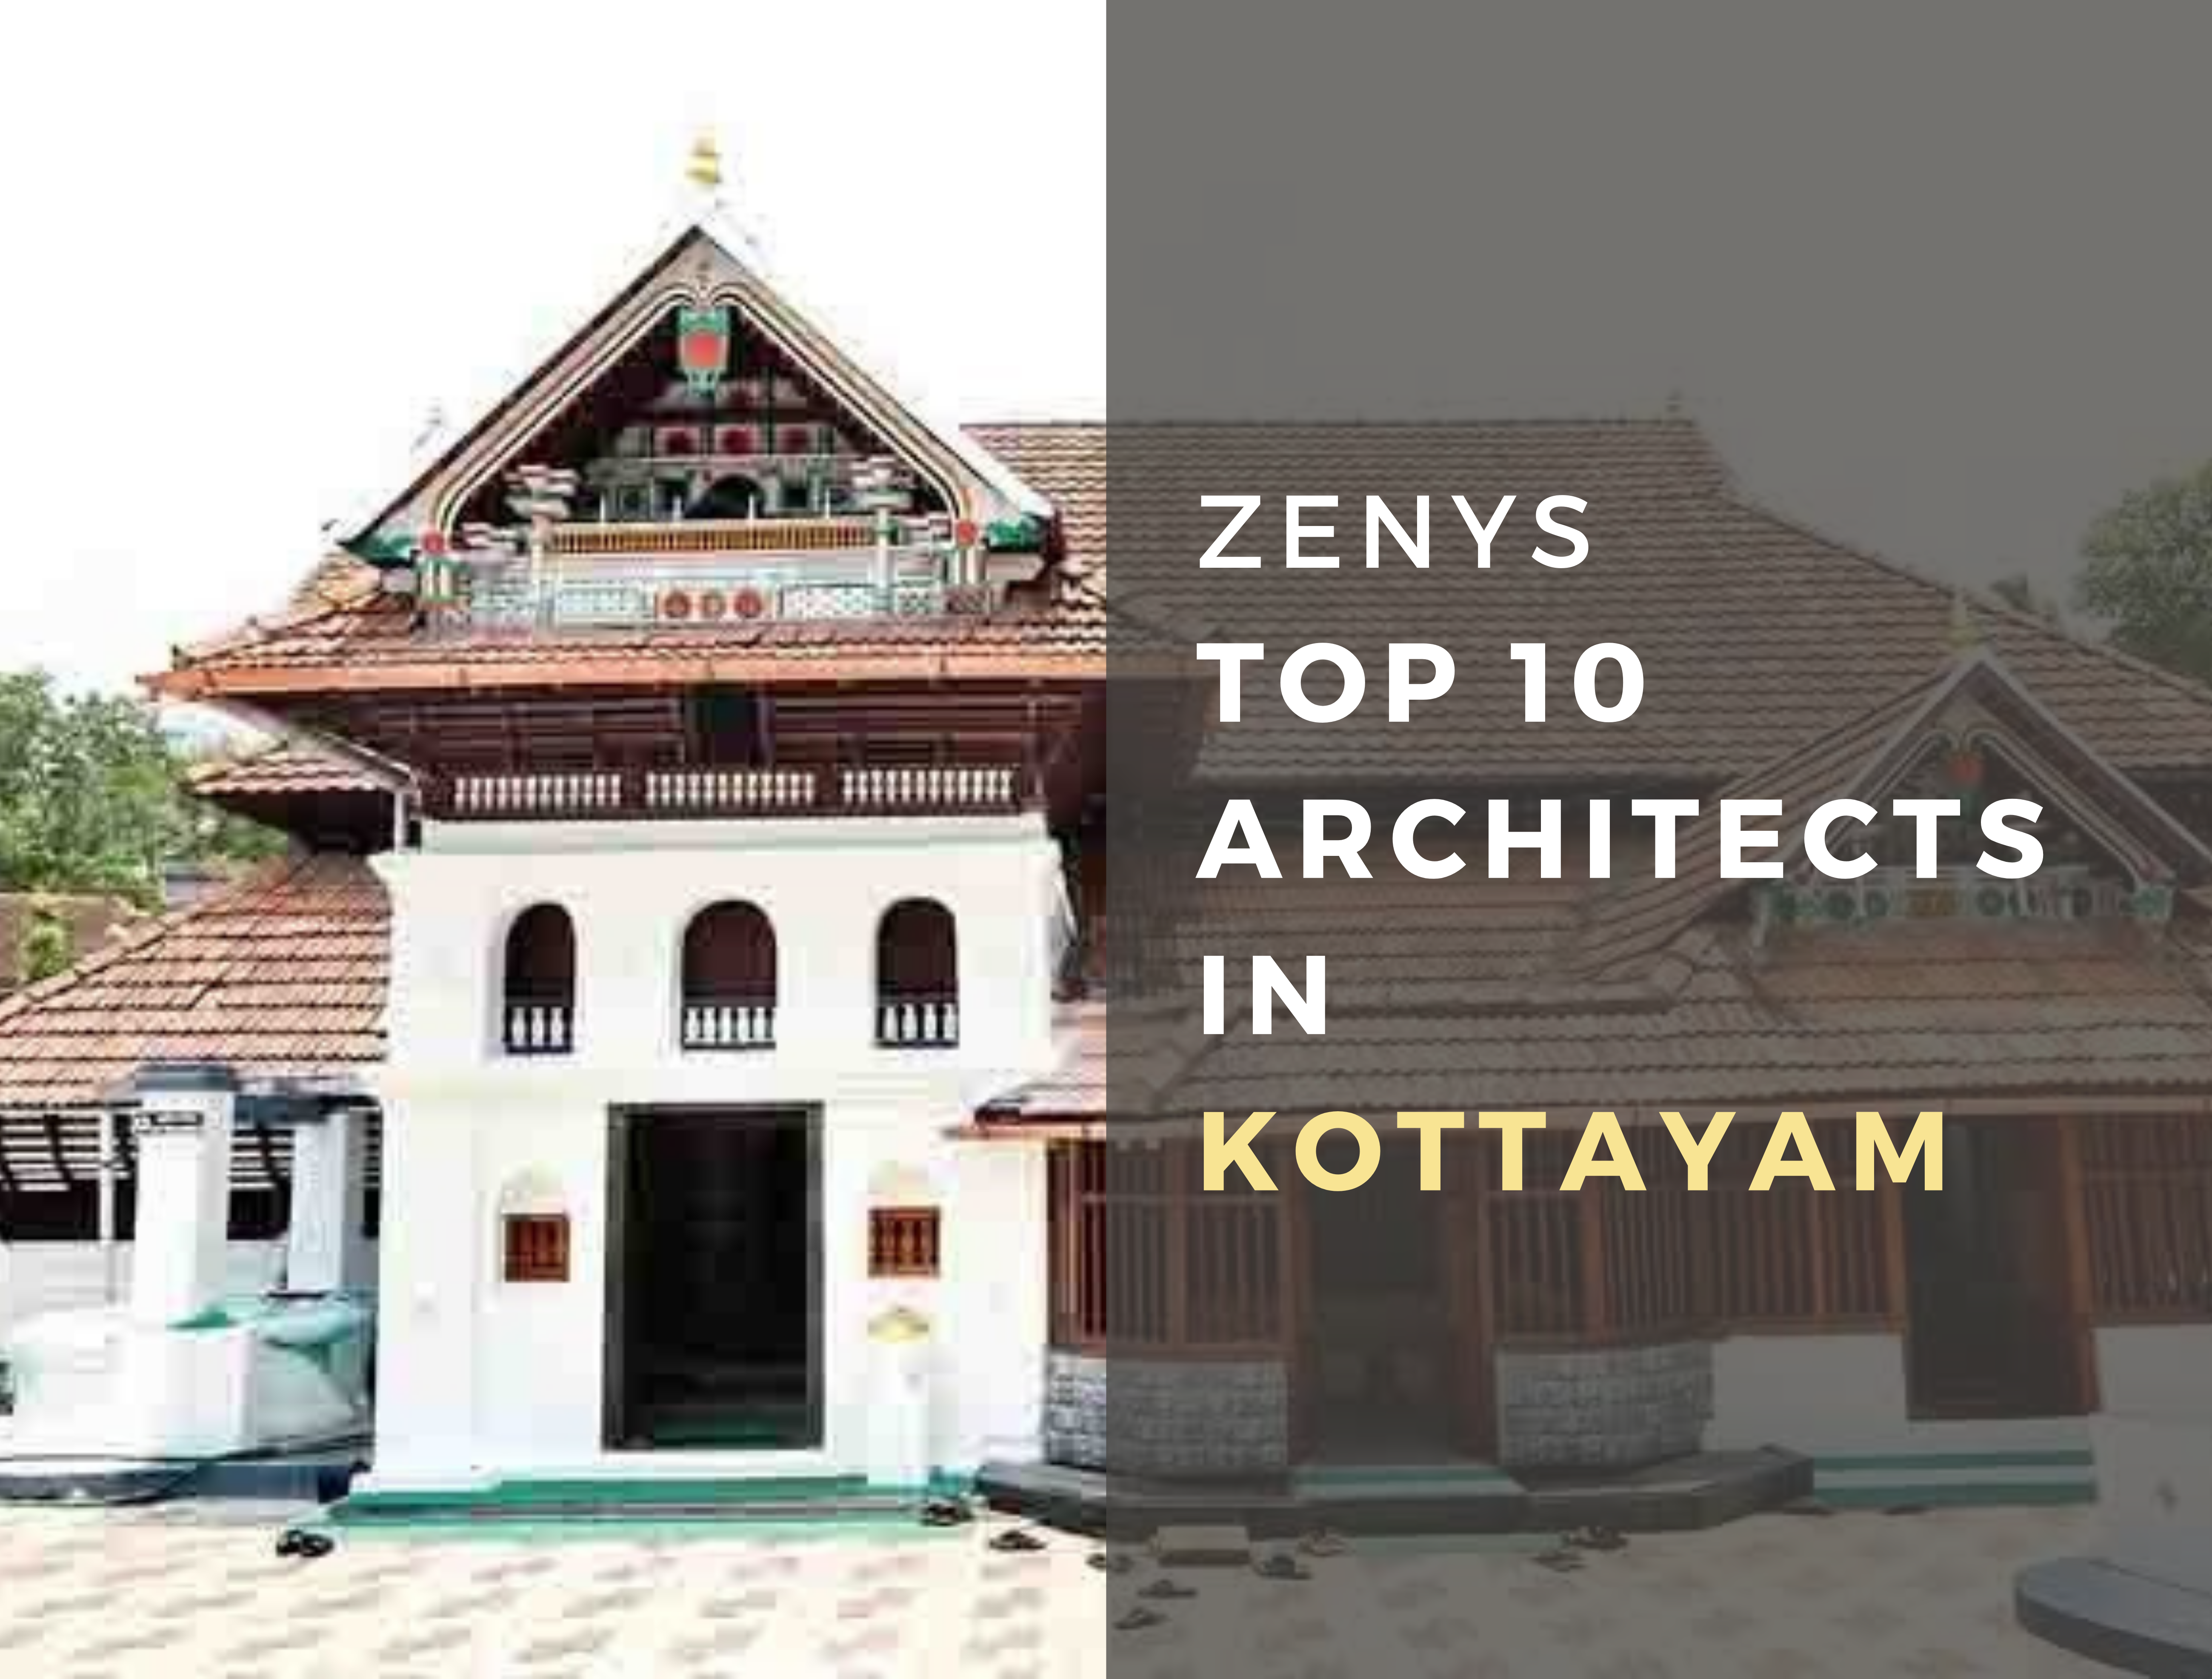 Top 10 Architects and Builders in Kottayam